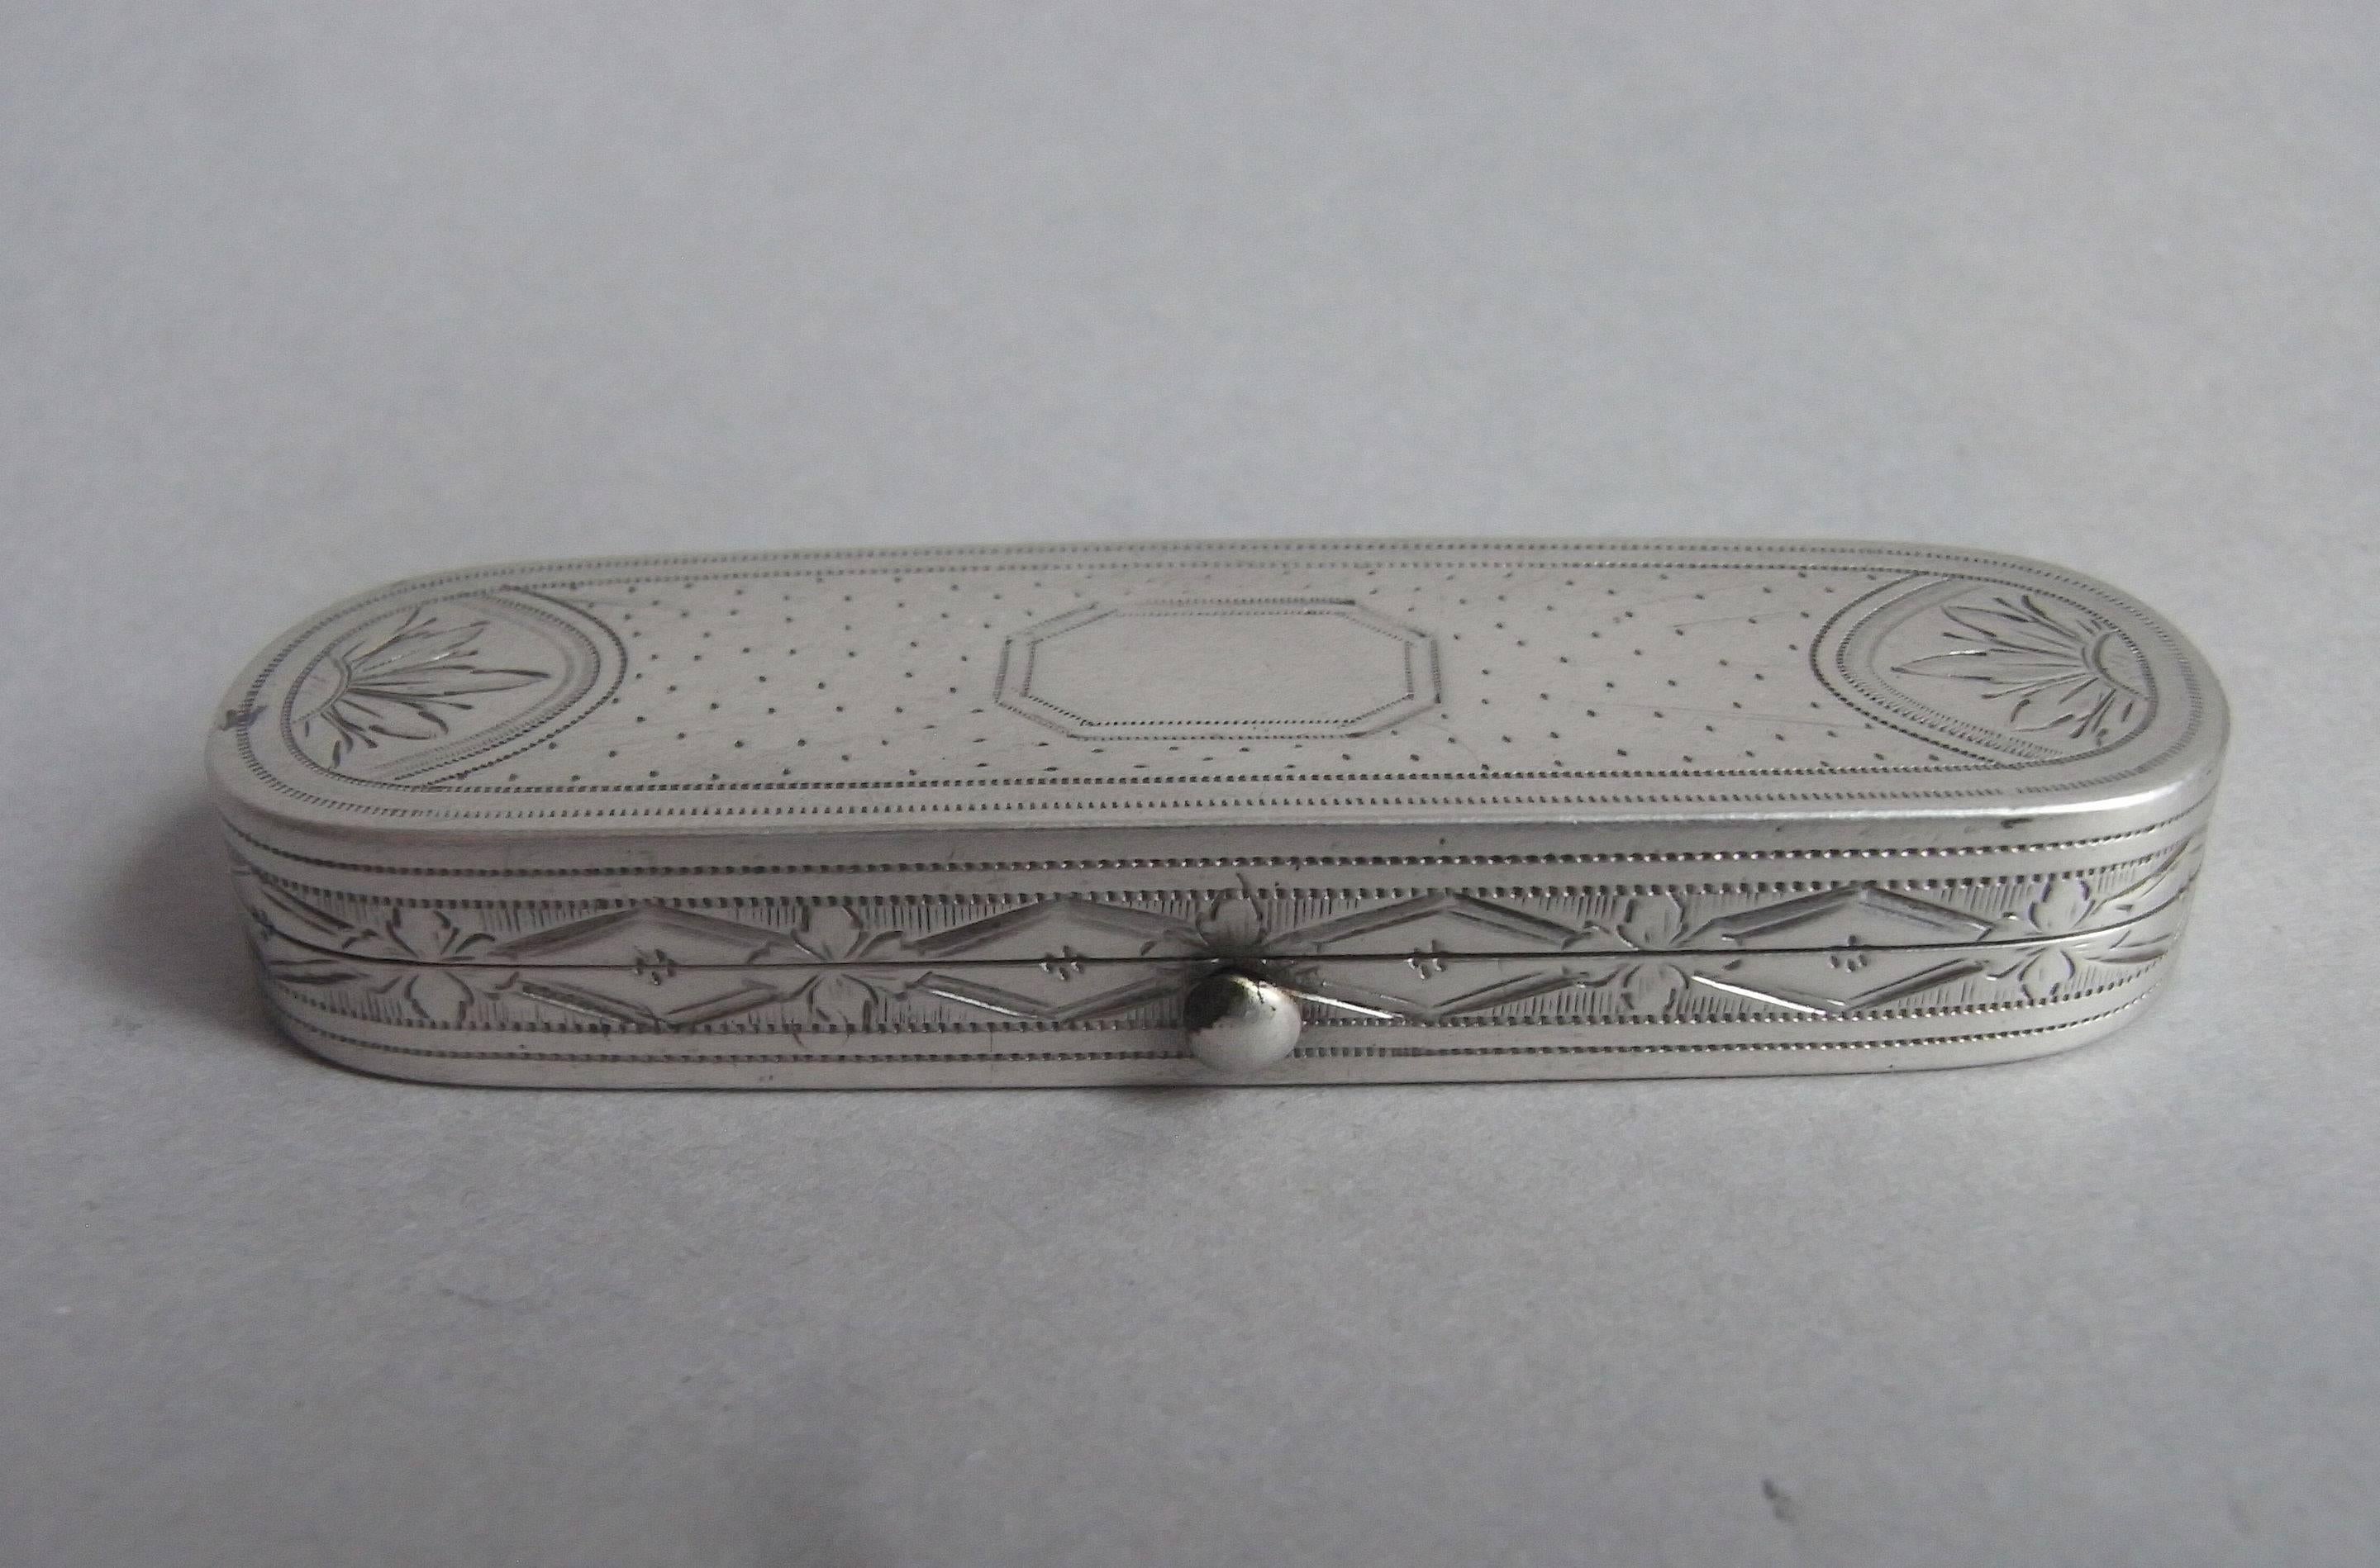 The toothpick box is of narrow rectangular form with rounded ends. The cover is engraved with sunburst design and floral motifs at each end in semi circles. The centre displays a vacant cut cornered cartouche. The sides are beautifully engraved with